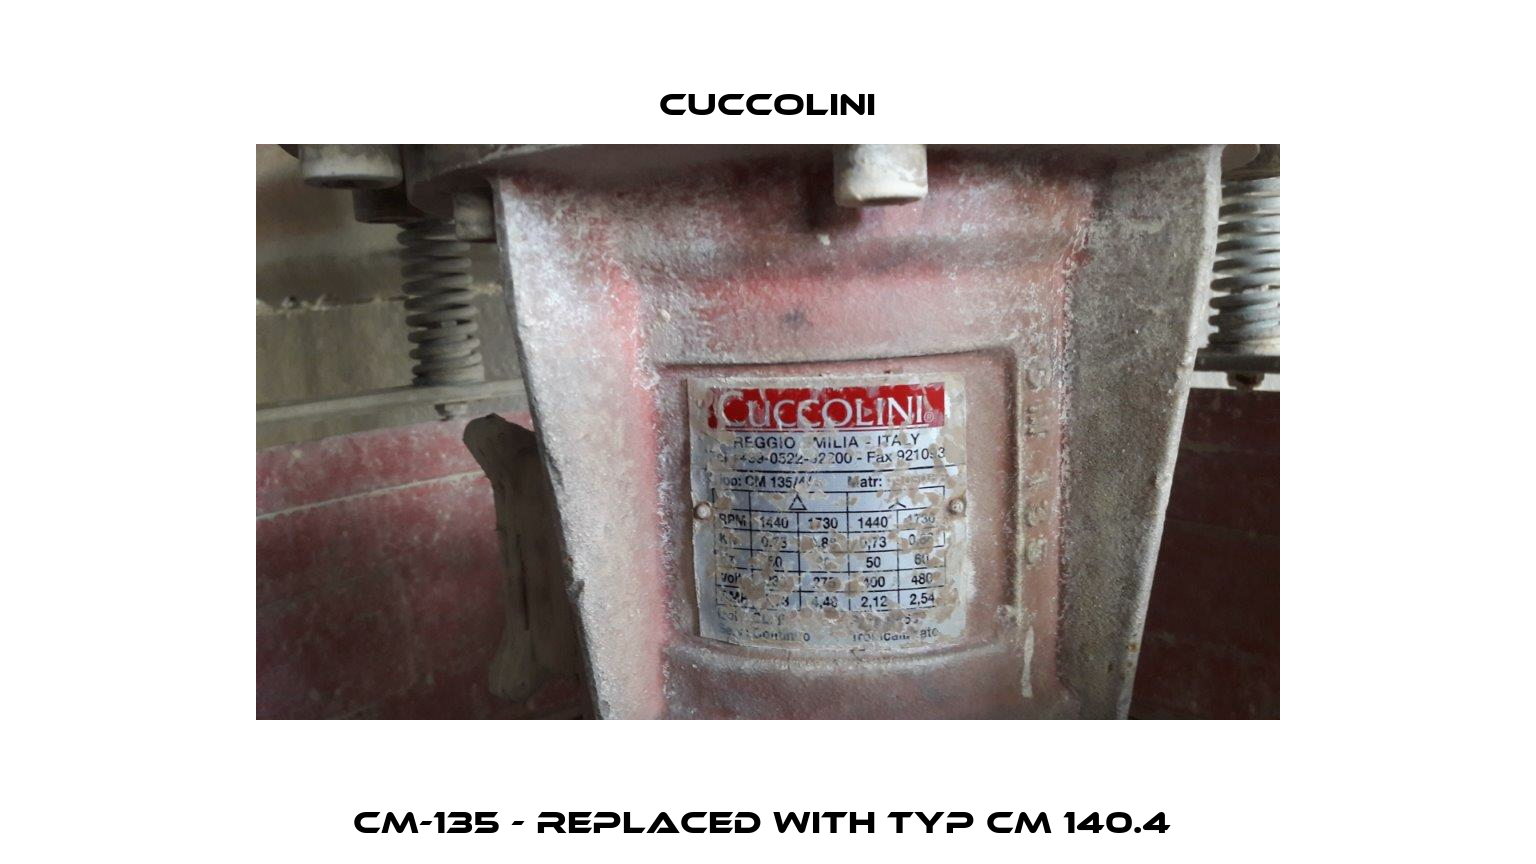 CM-135 - replaced with Typ CM 140.4  Cuccolini